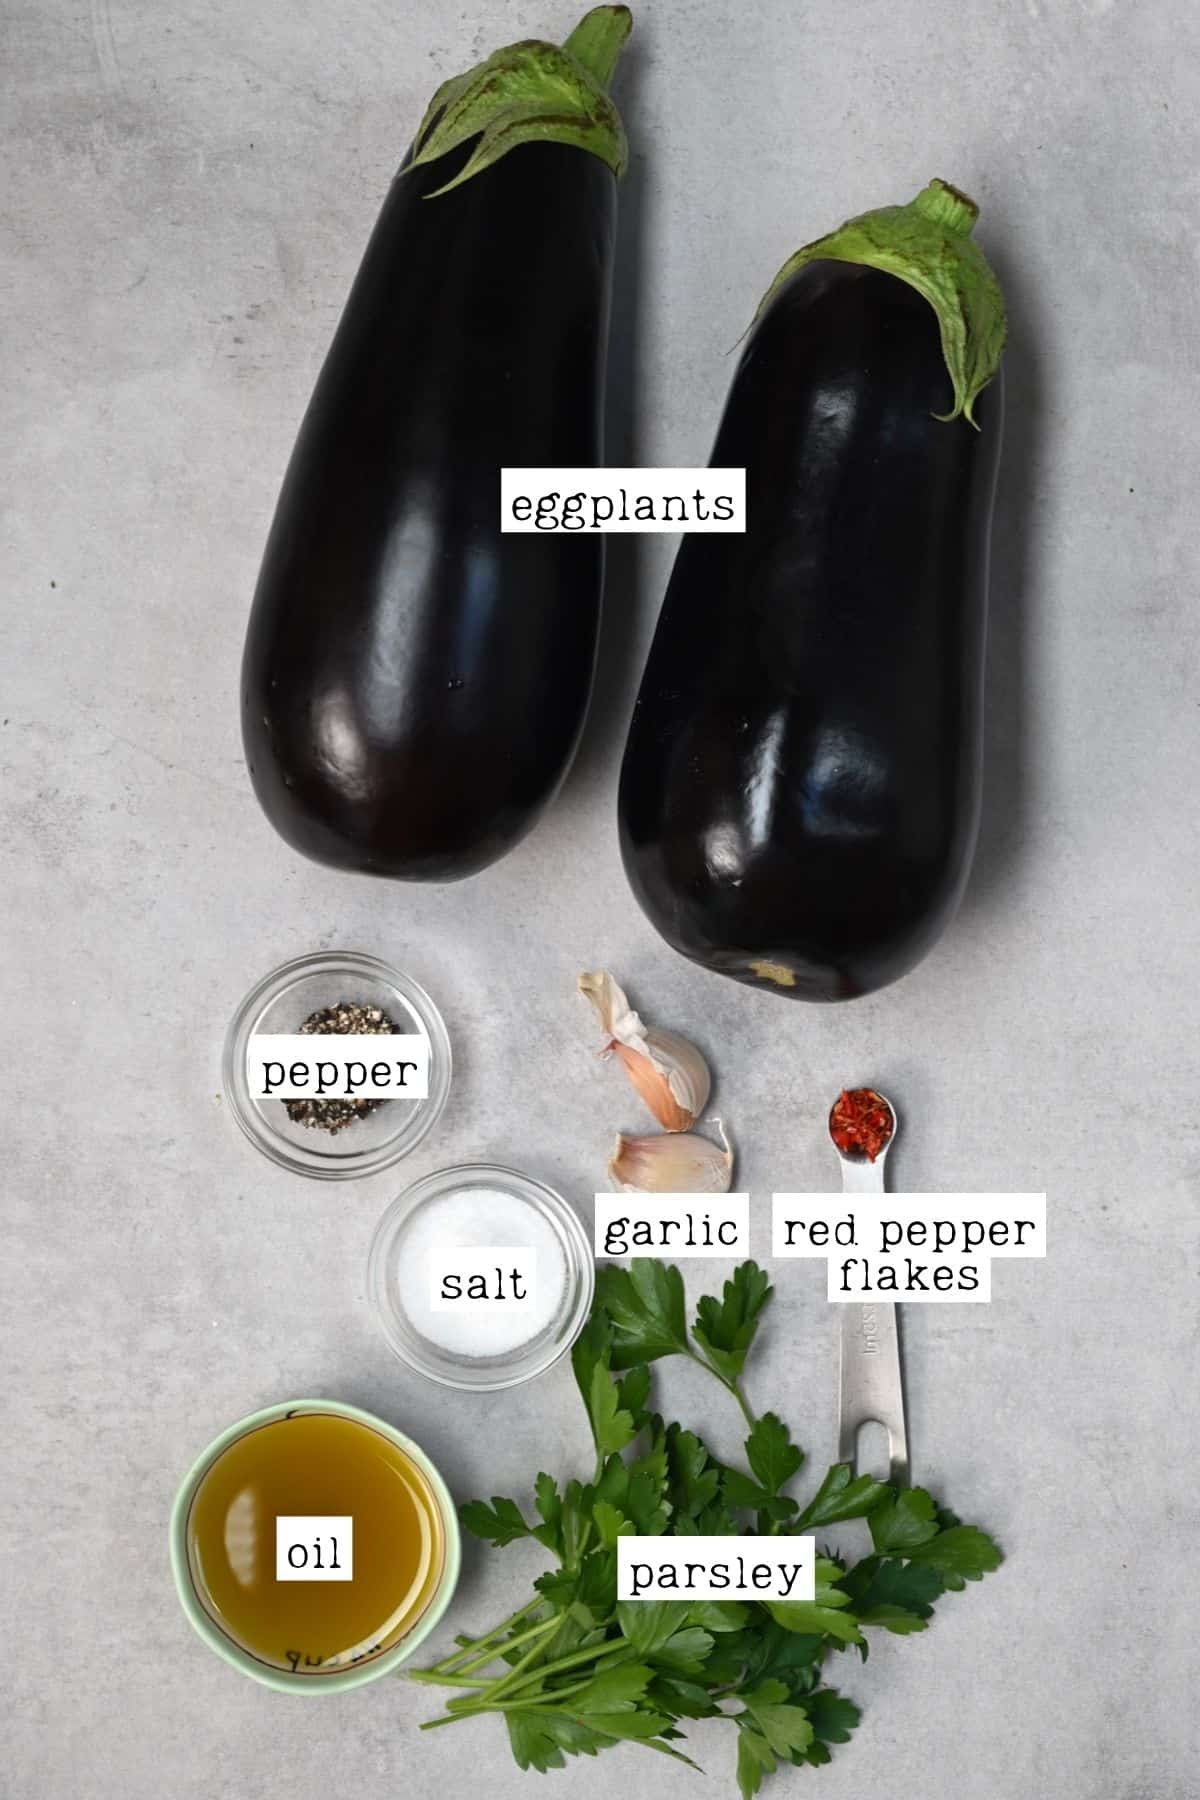 Ingredients for grilled eggplants